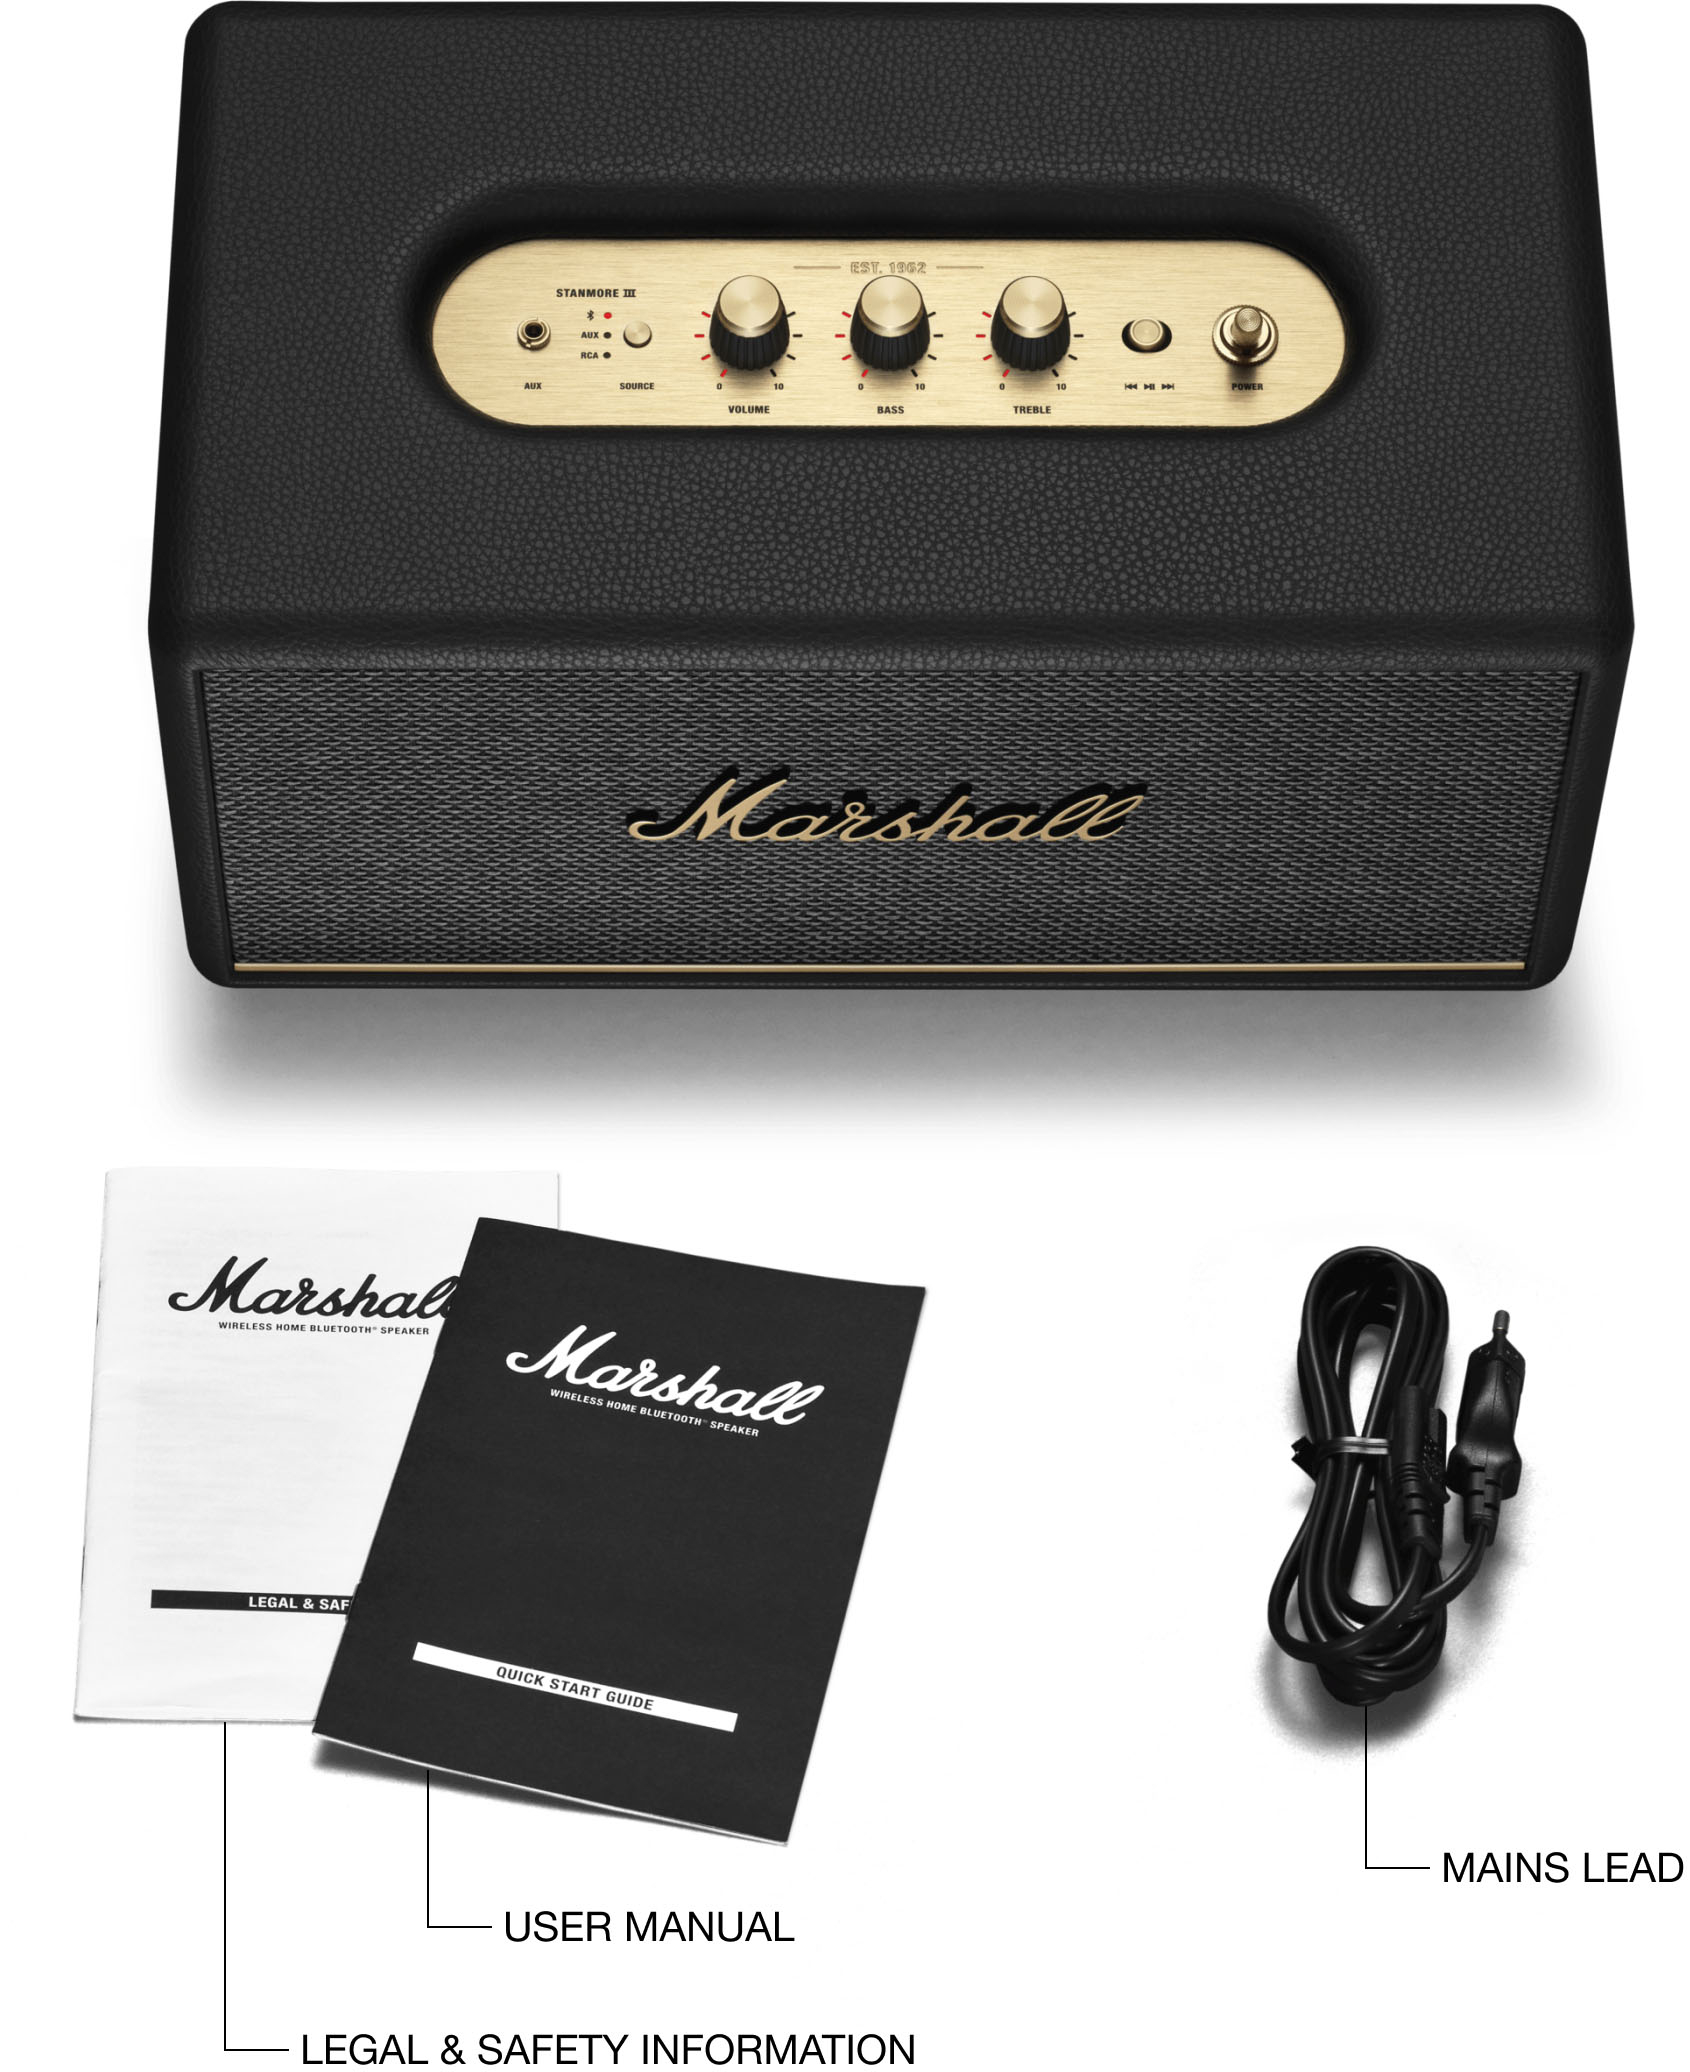 Marshall Stanmore III review: Stylish and powerful - Can Buy or Not